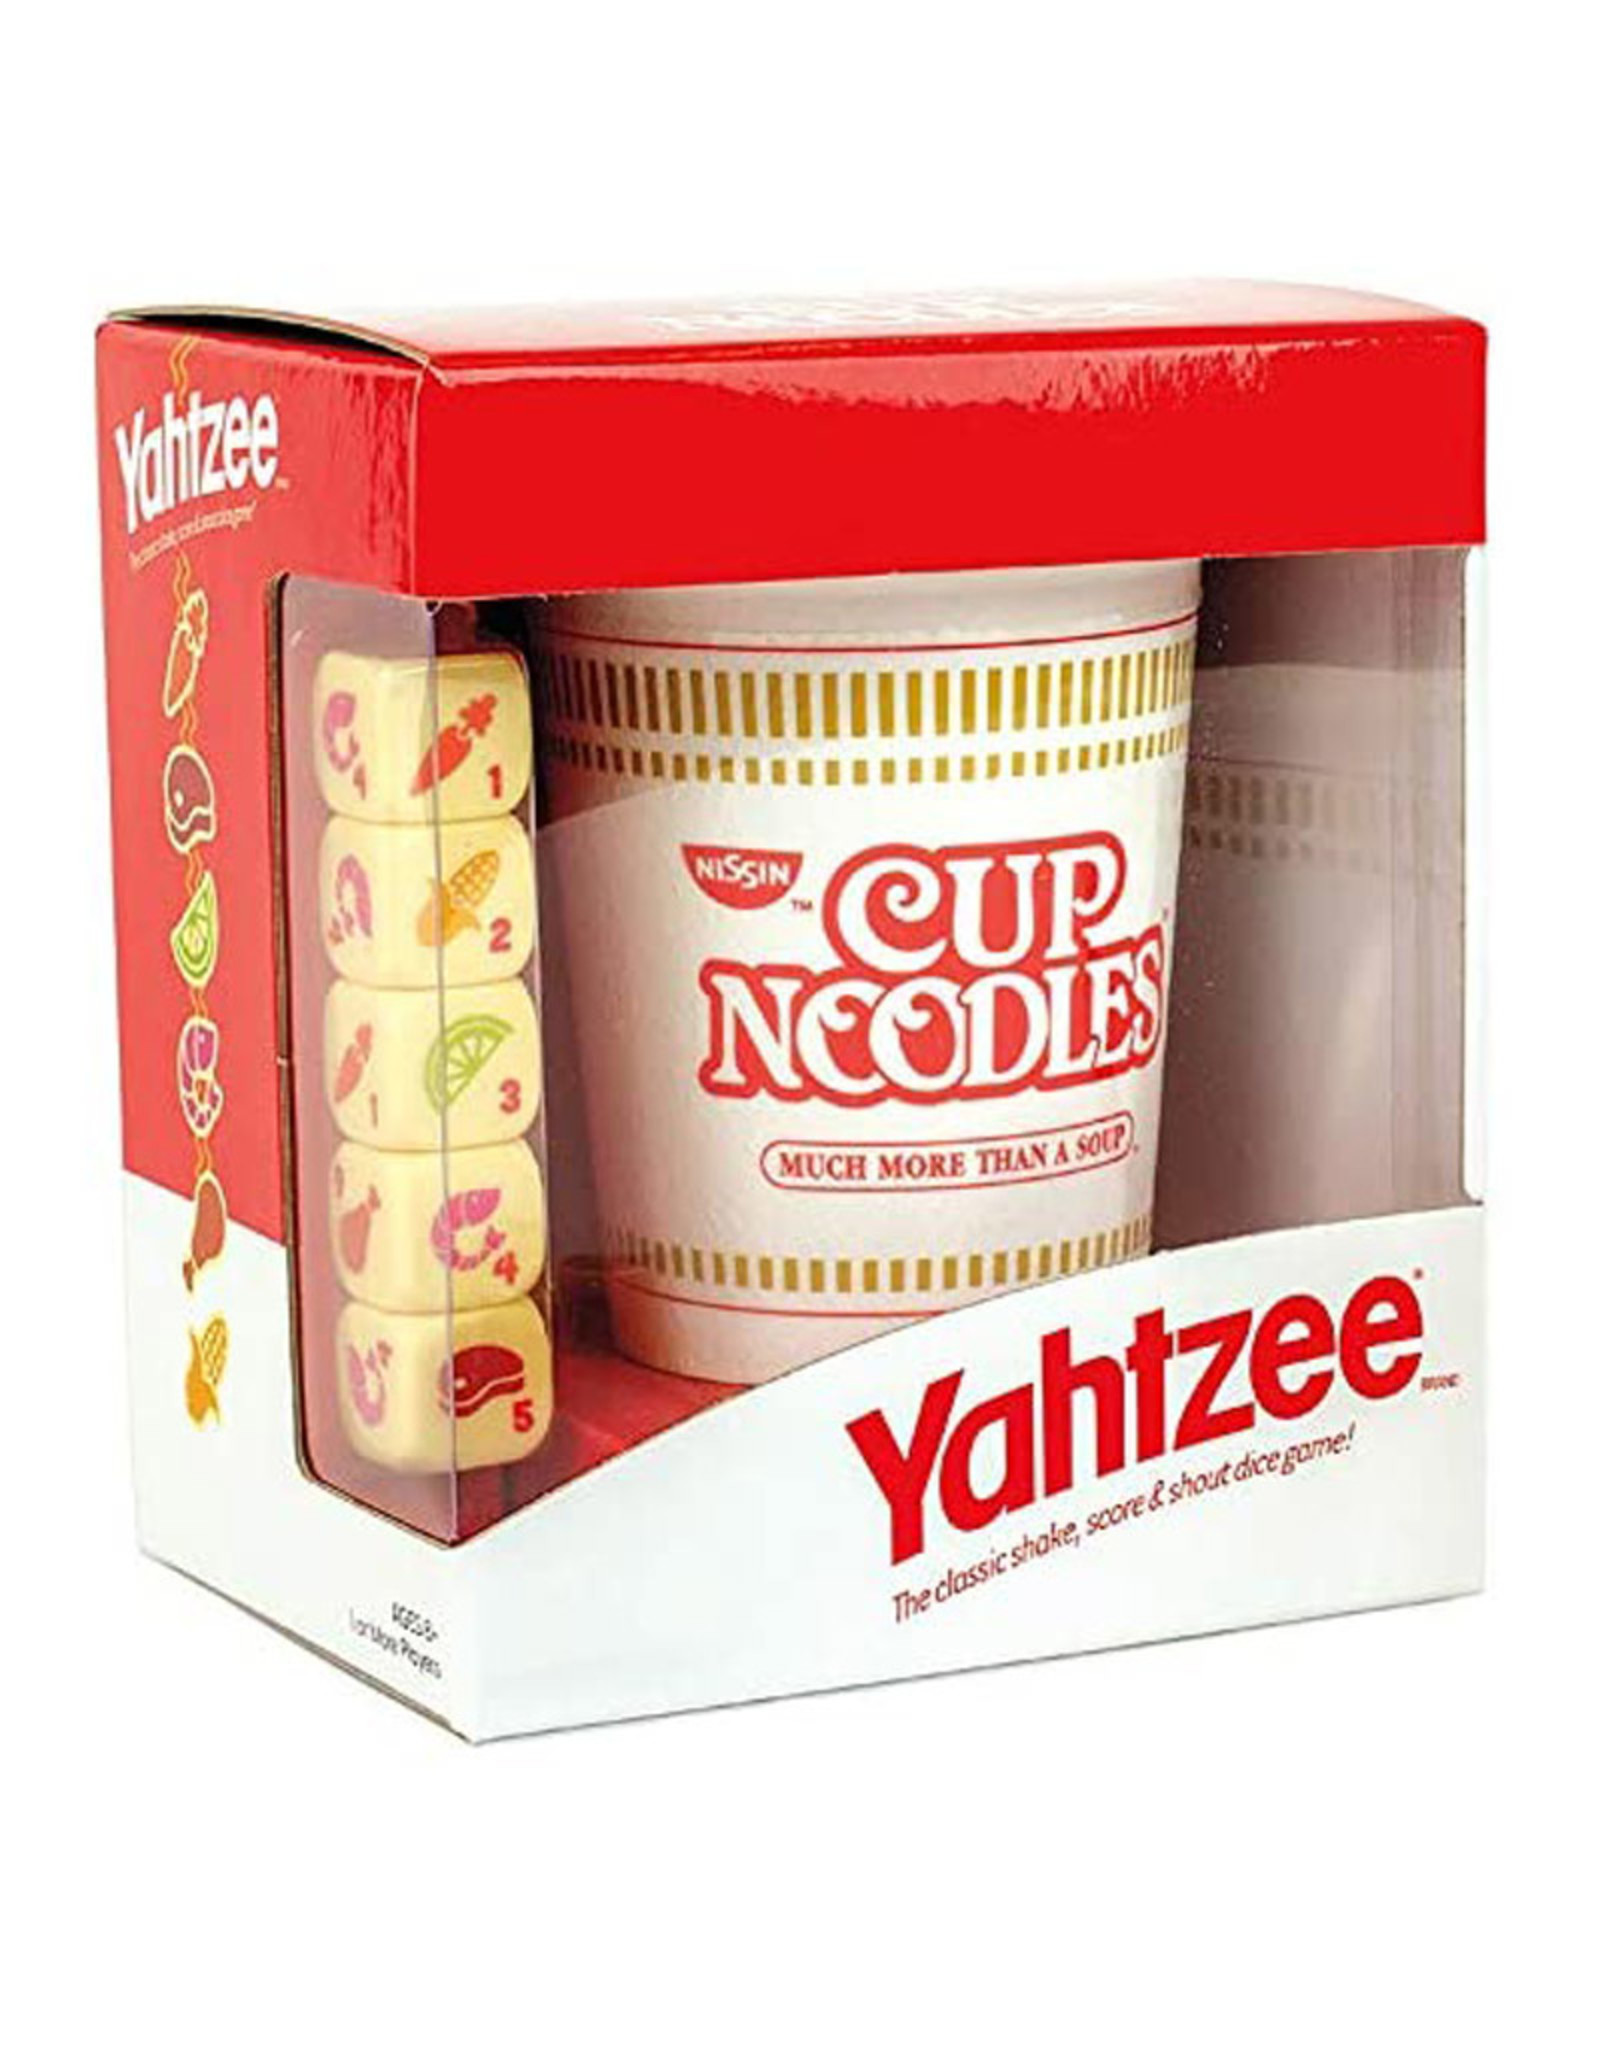 Usaopoly Yahtzee: Cup Noodles